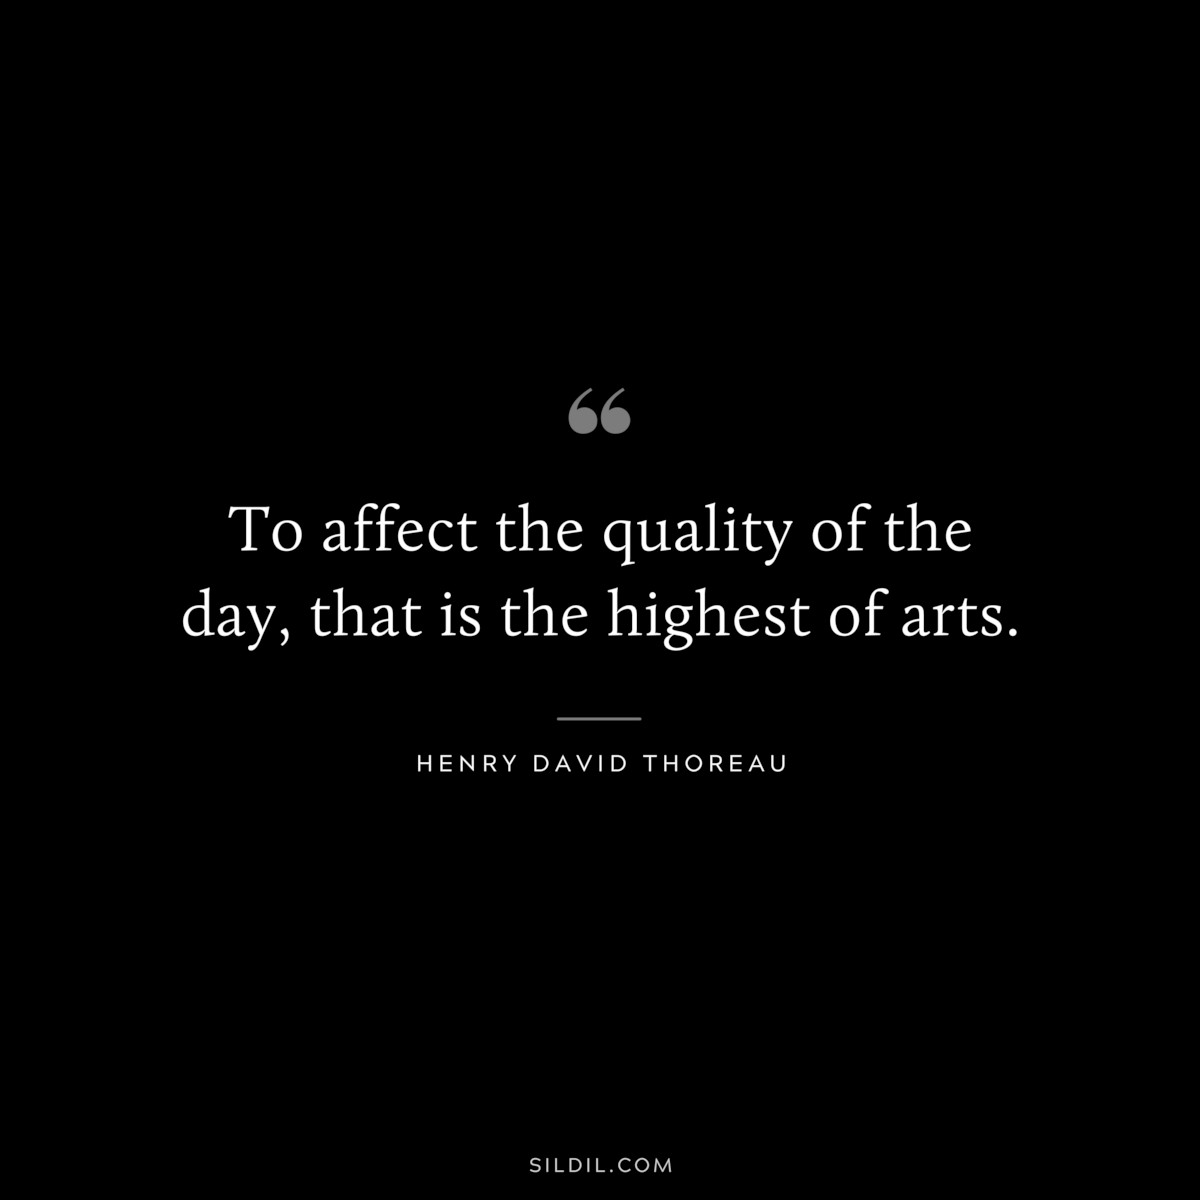 To affect the quality of the day, that is the highest of arts. — Henry David Thoreau